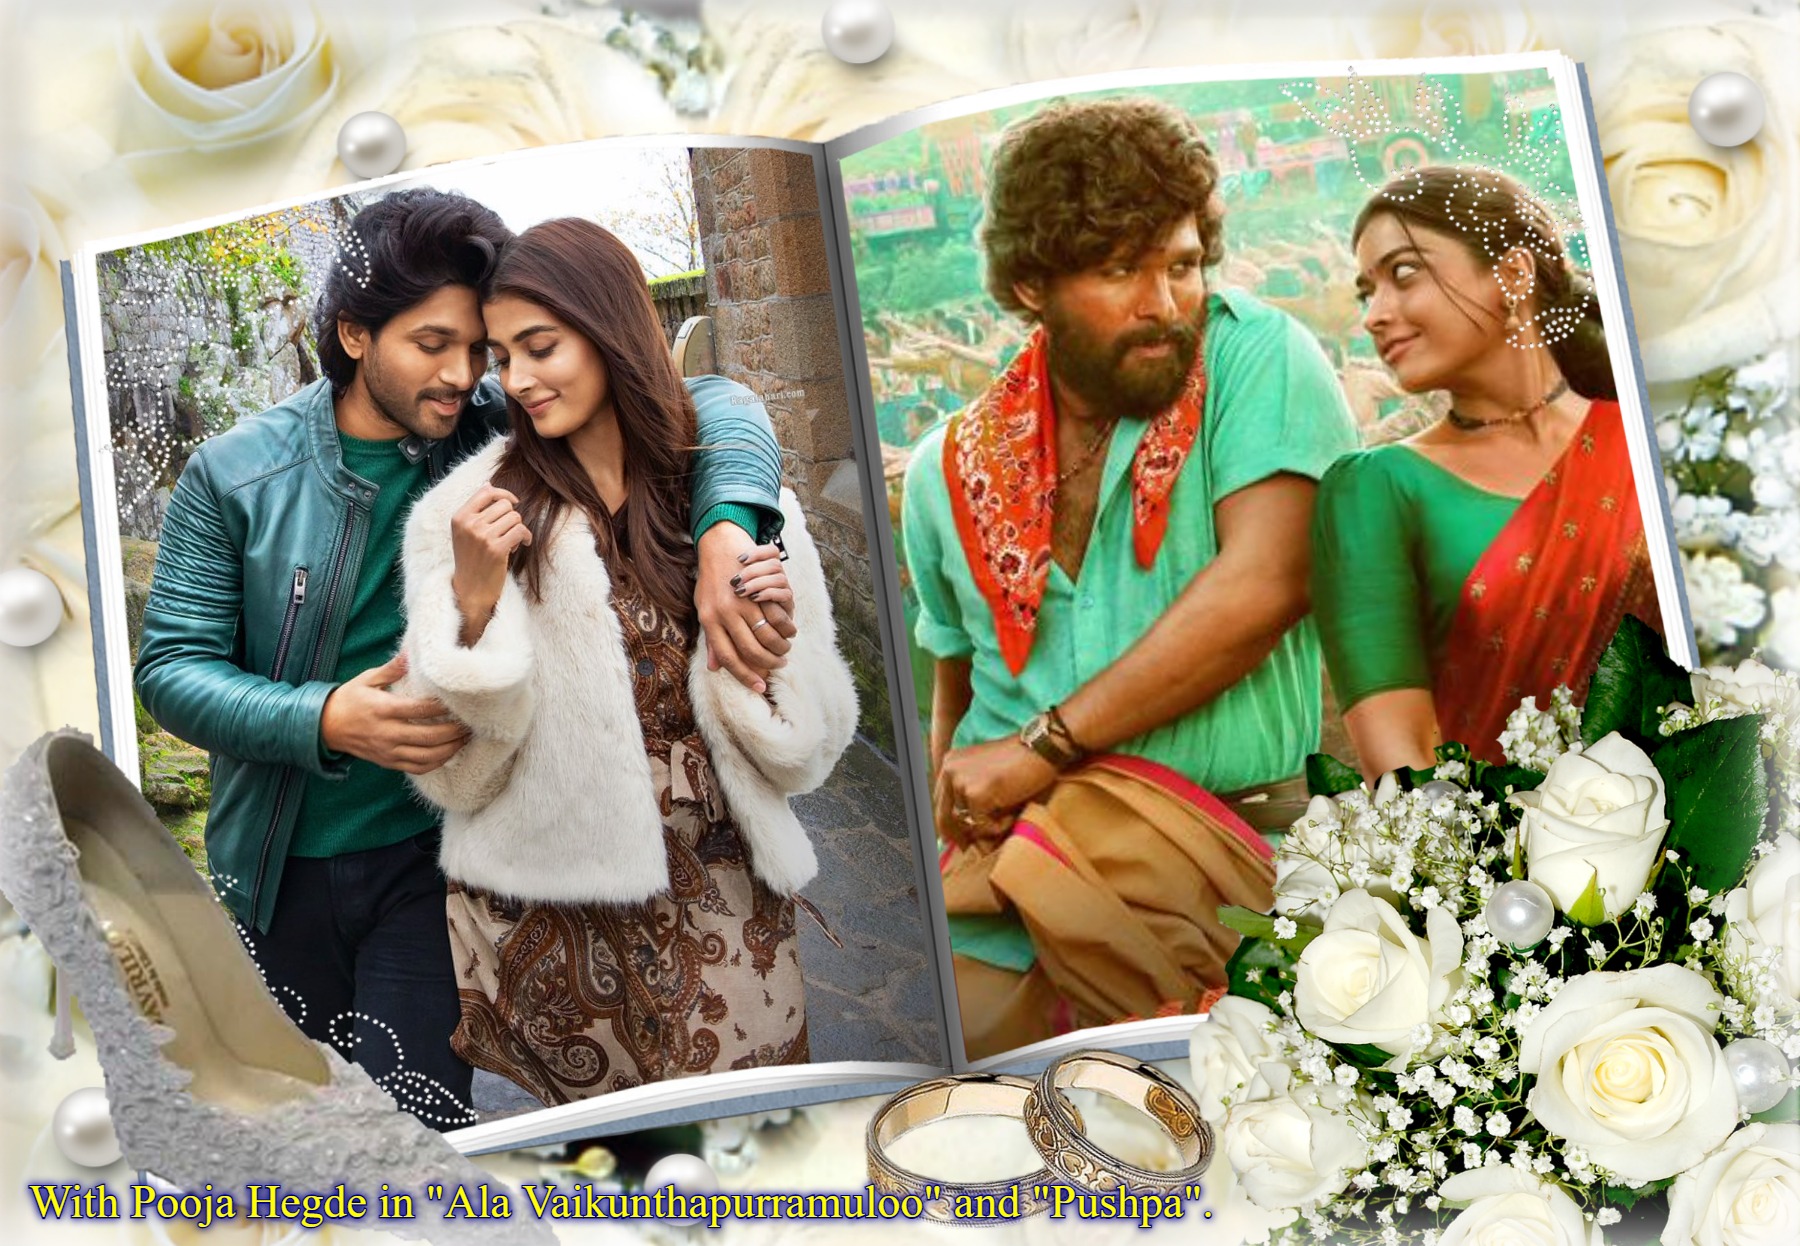 You are currently viewing “Hindi Version of Allu Arjun’s ‘Ala Vaikunthapurramuloo’ Ready For Release”